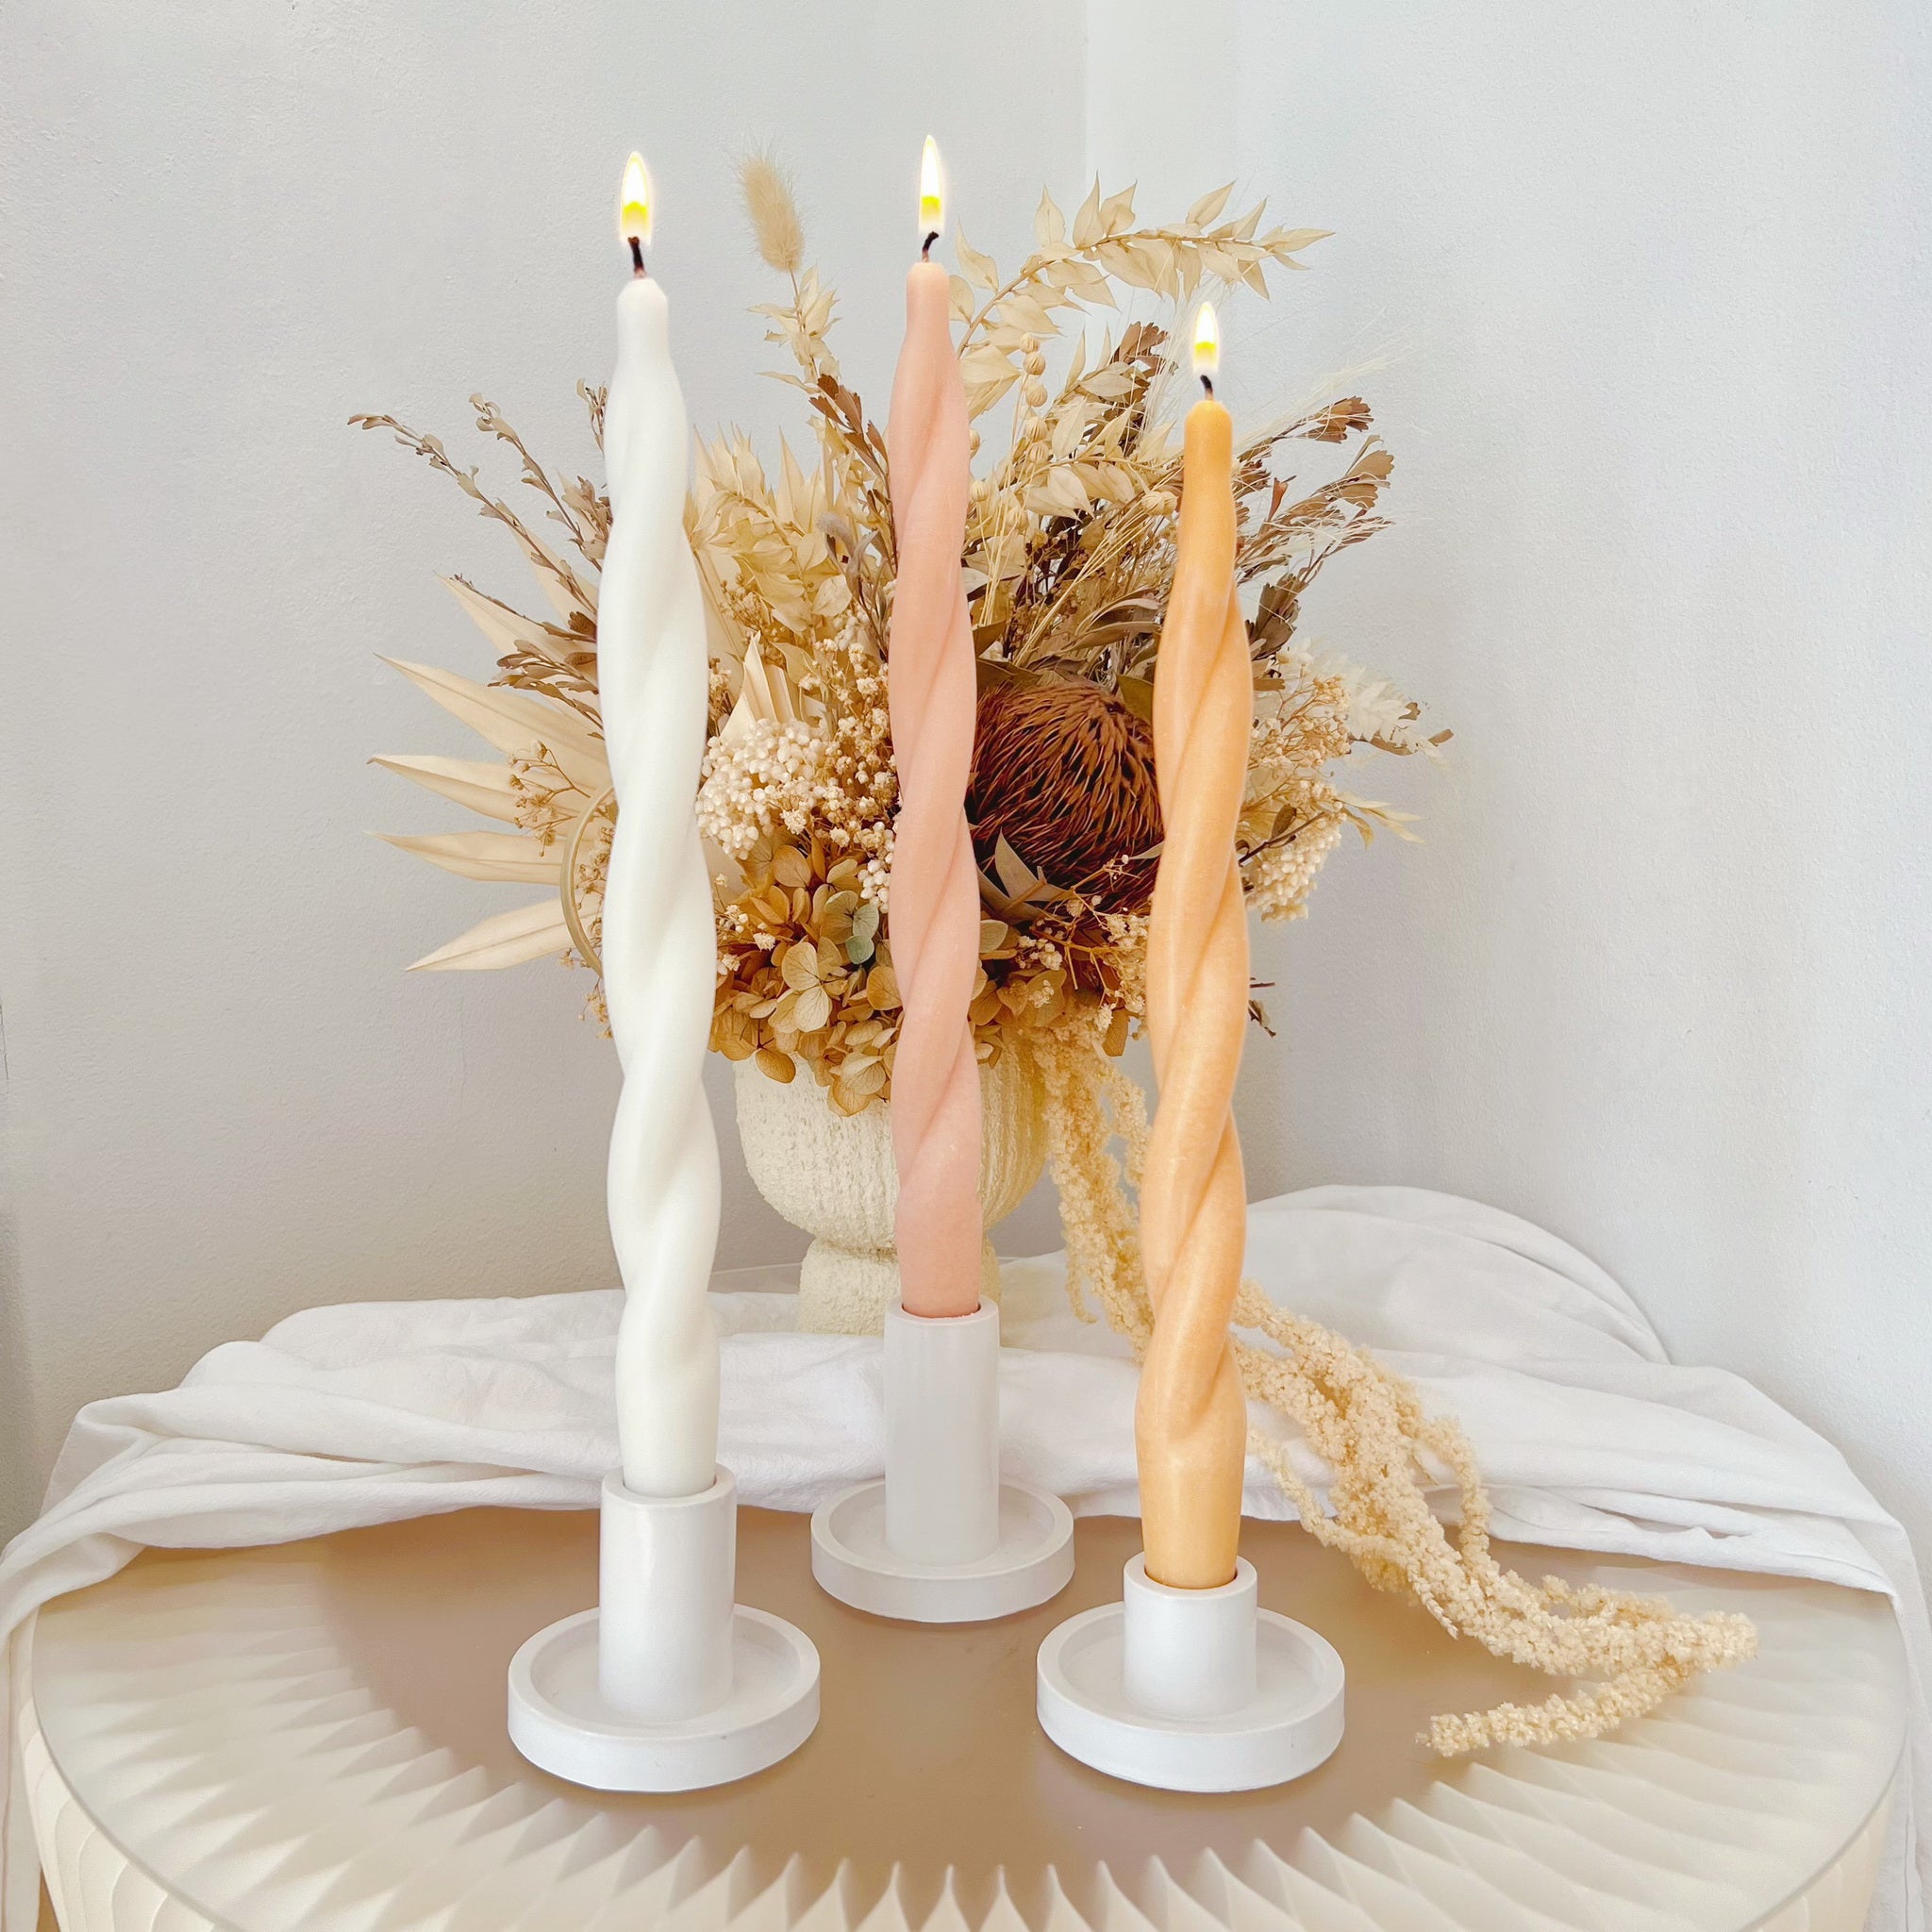 Tall Swirl Dinner Candle - Long Lasting Taper Candle